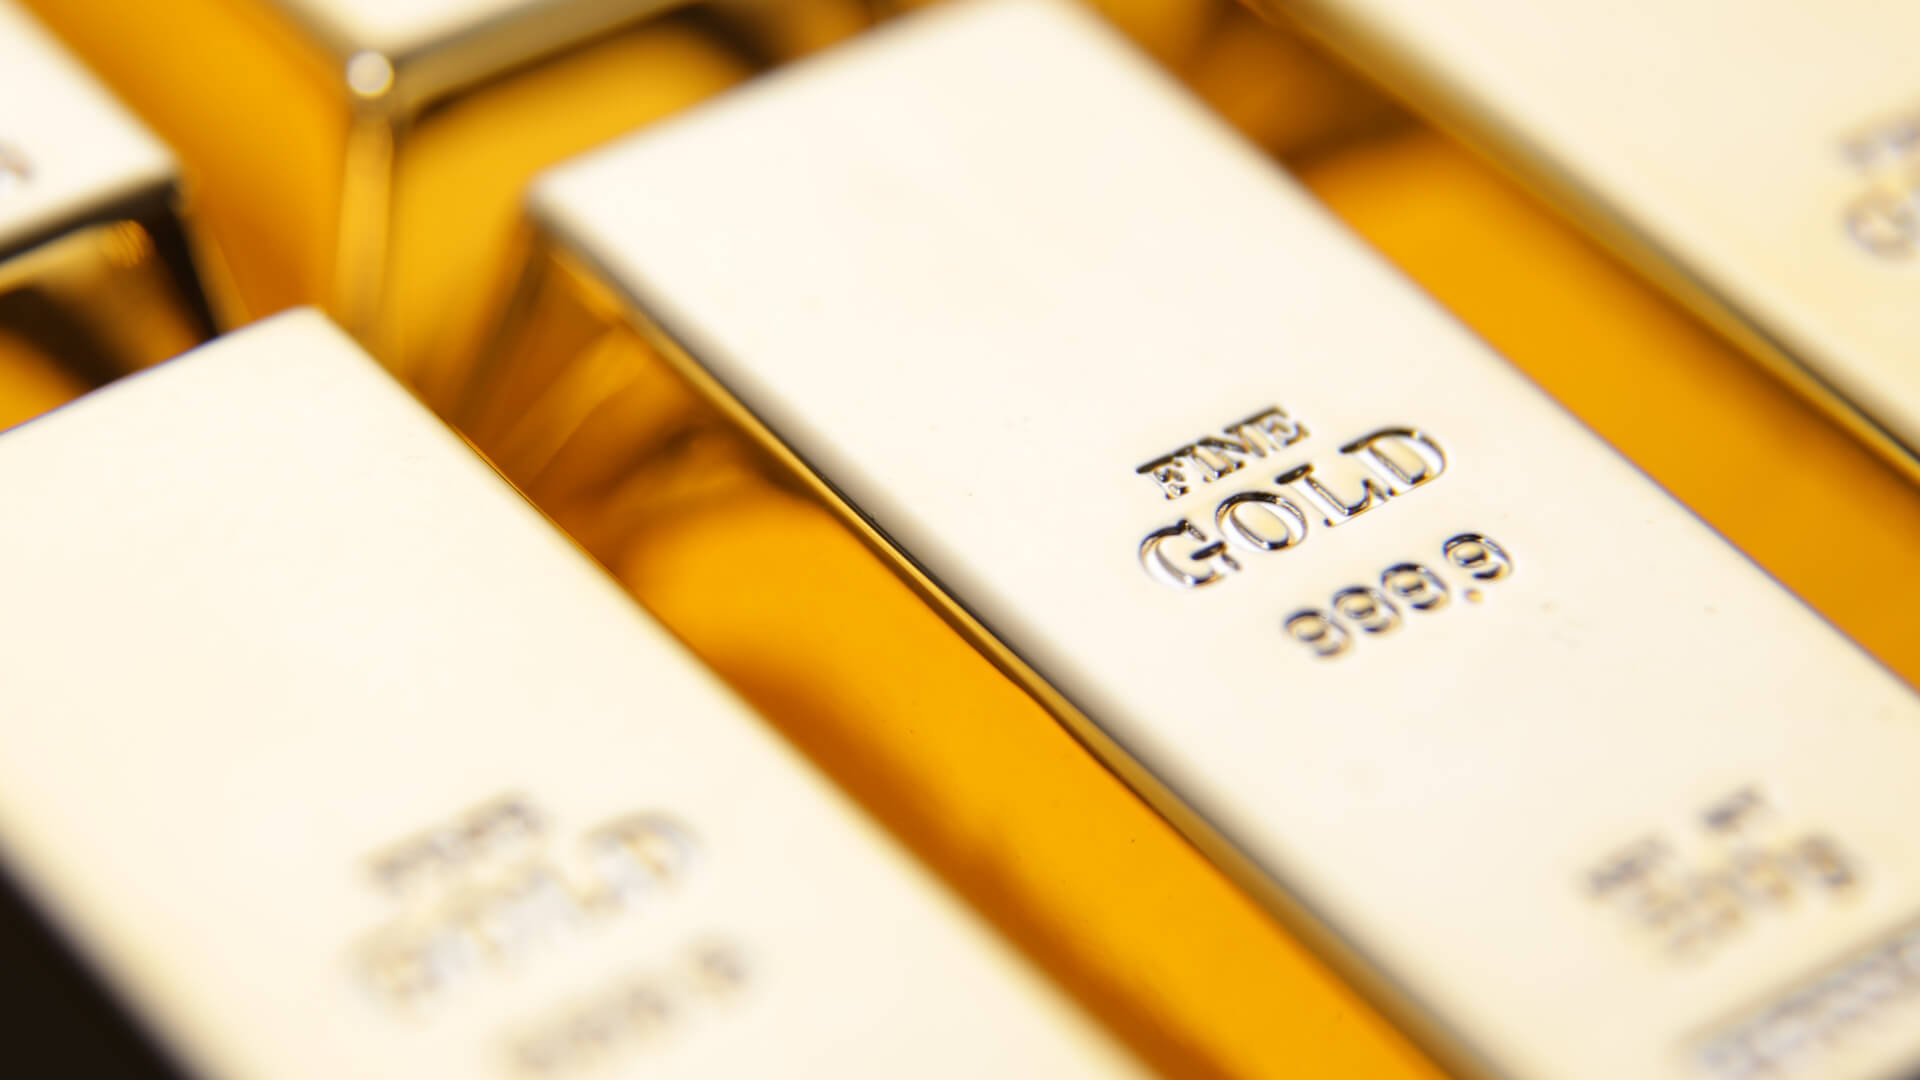 The Secret World of Bullion Banking: Who Sets Gold Prices?